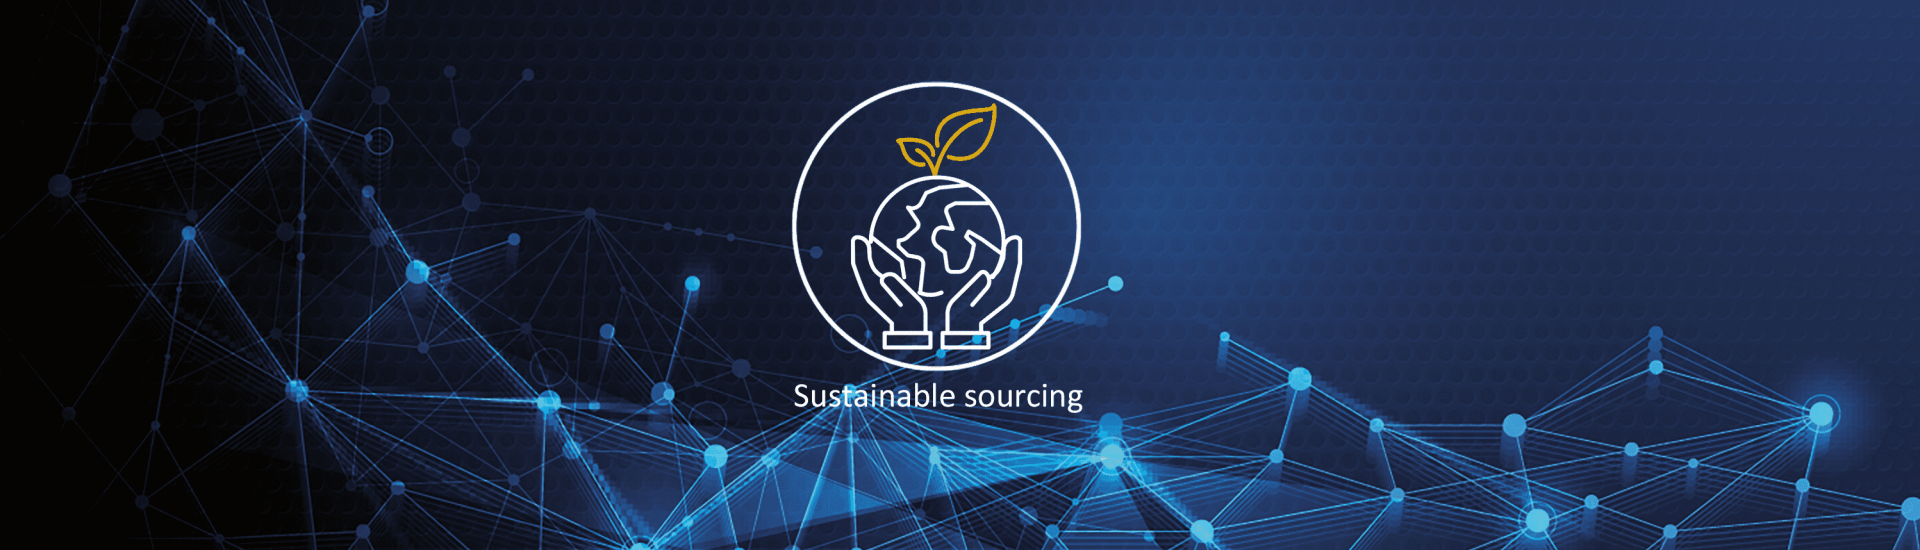 Sustainable sourcing policy